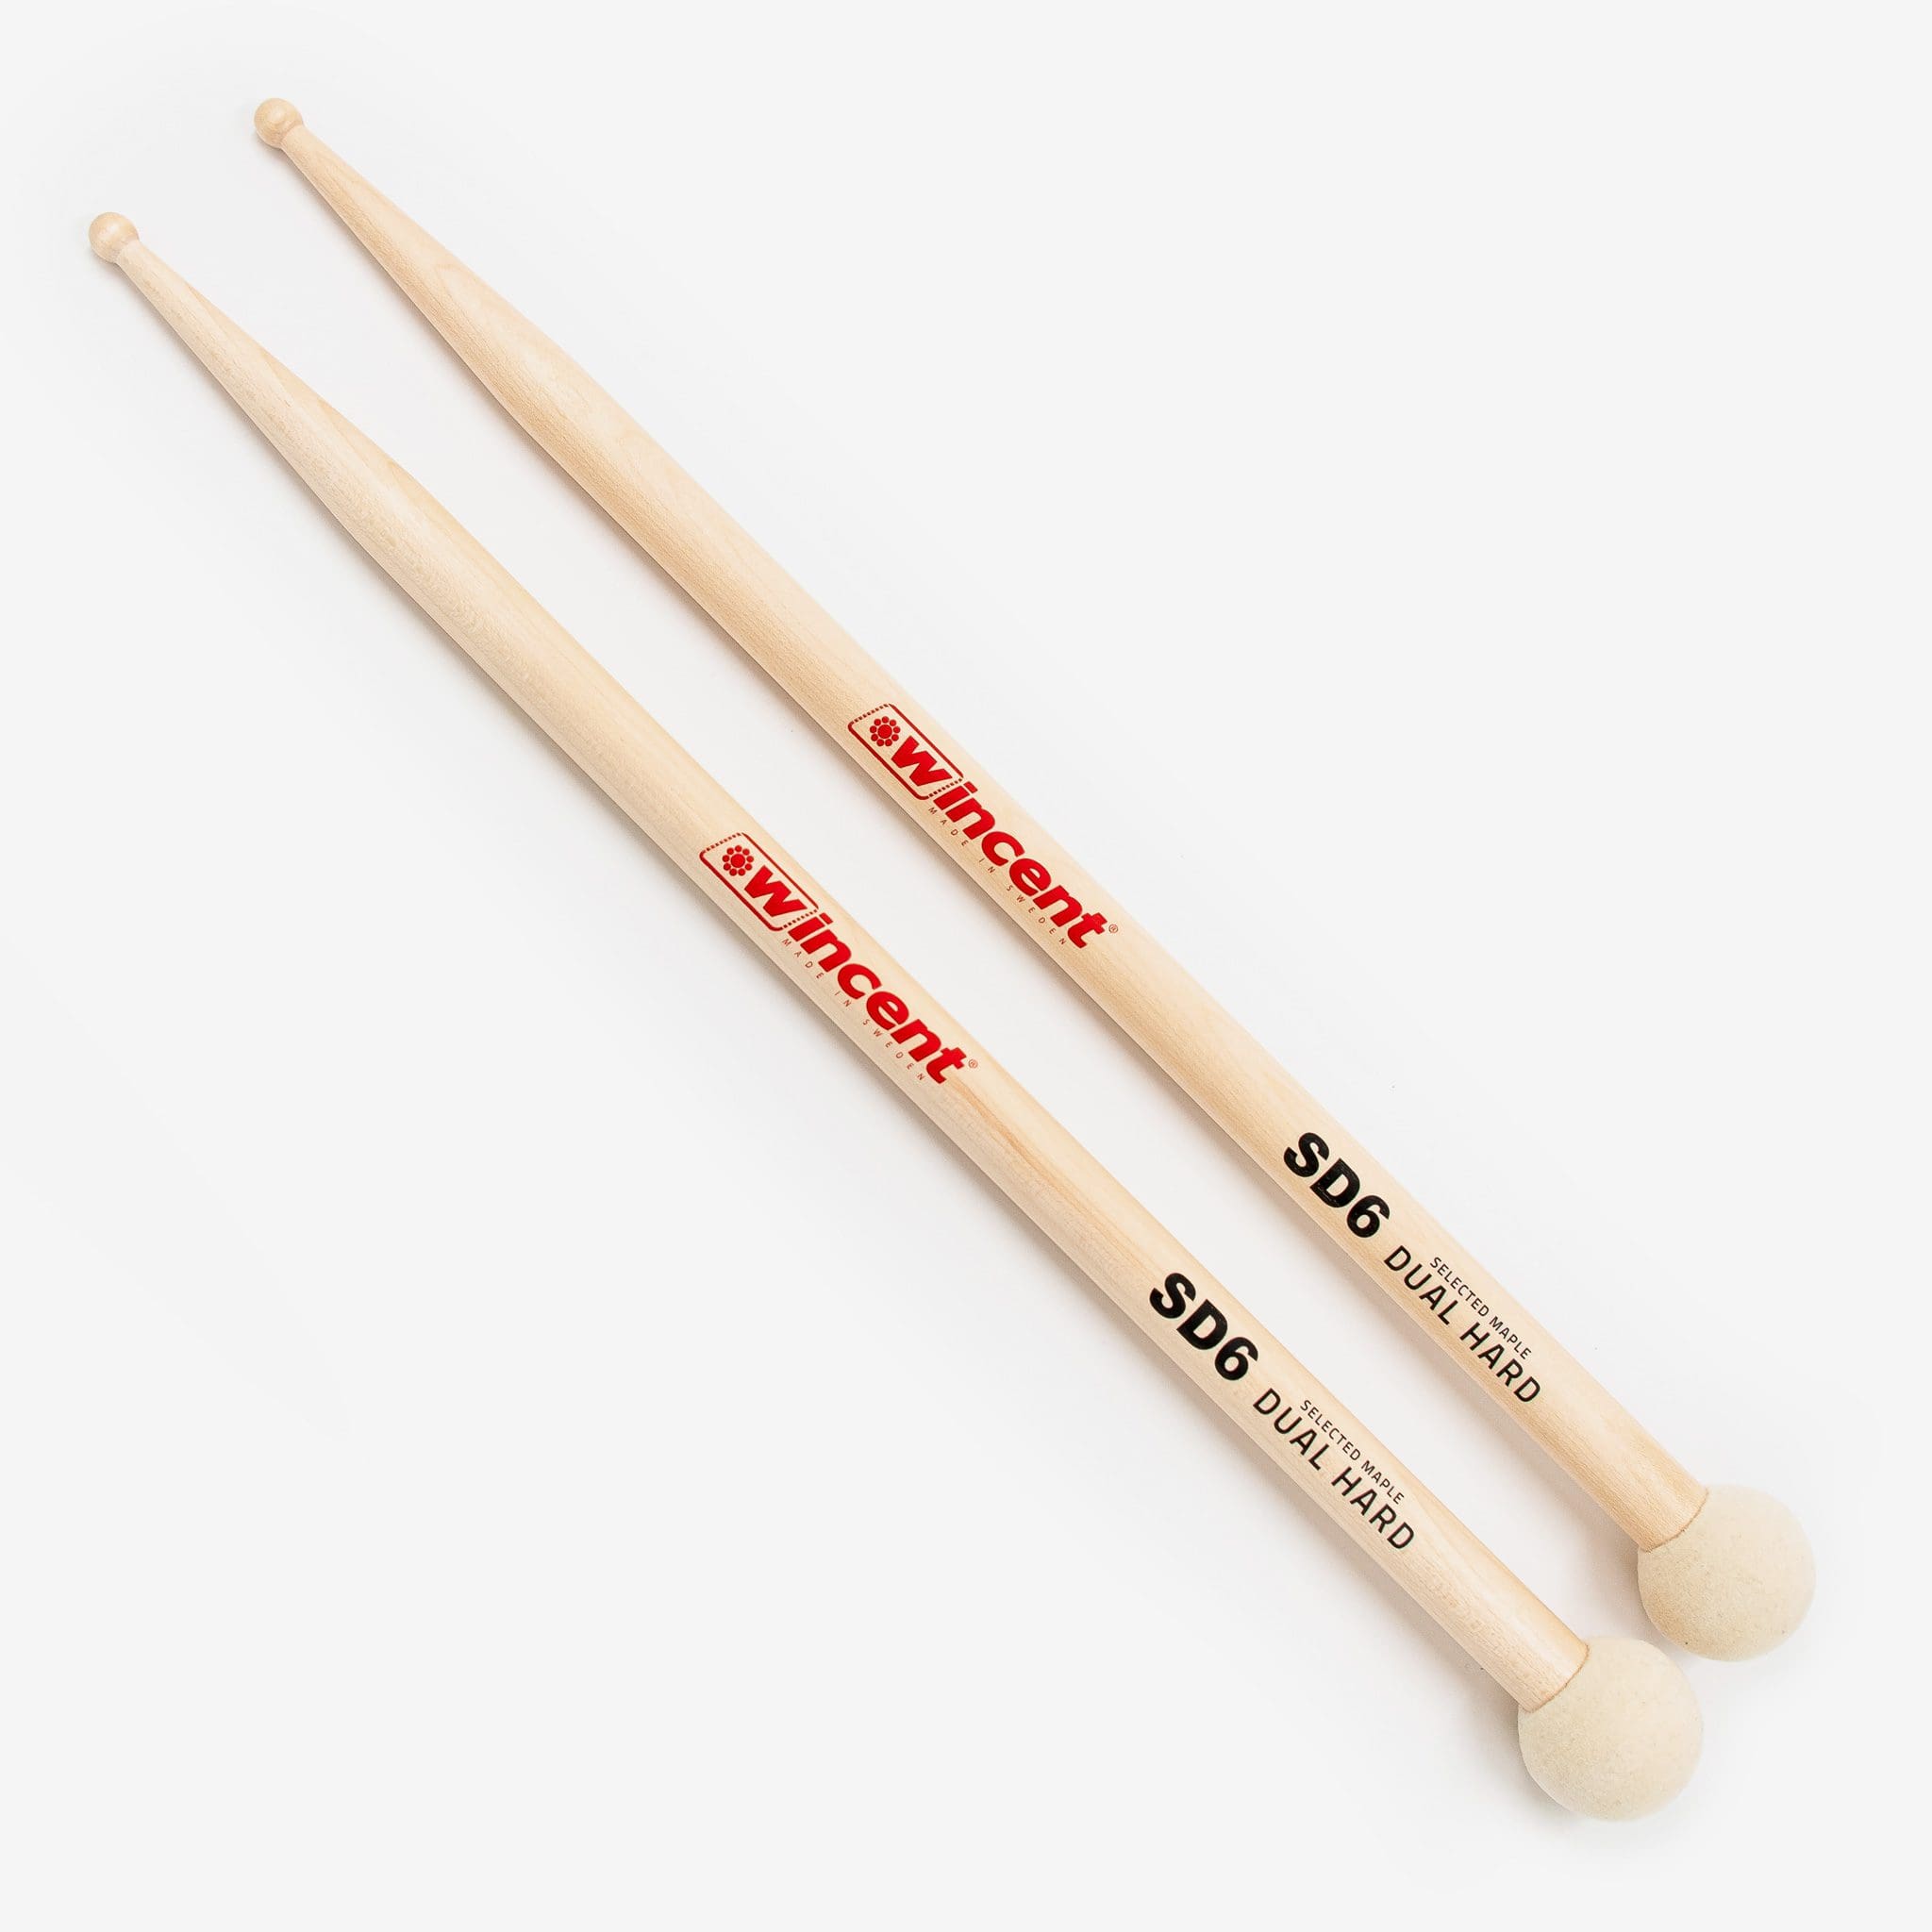 DualHard Double Sided Cymbal Mallet Pair